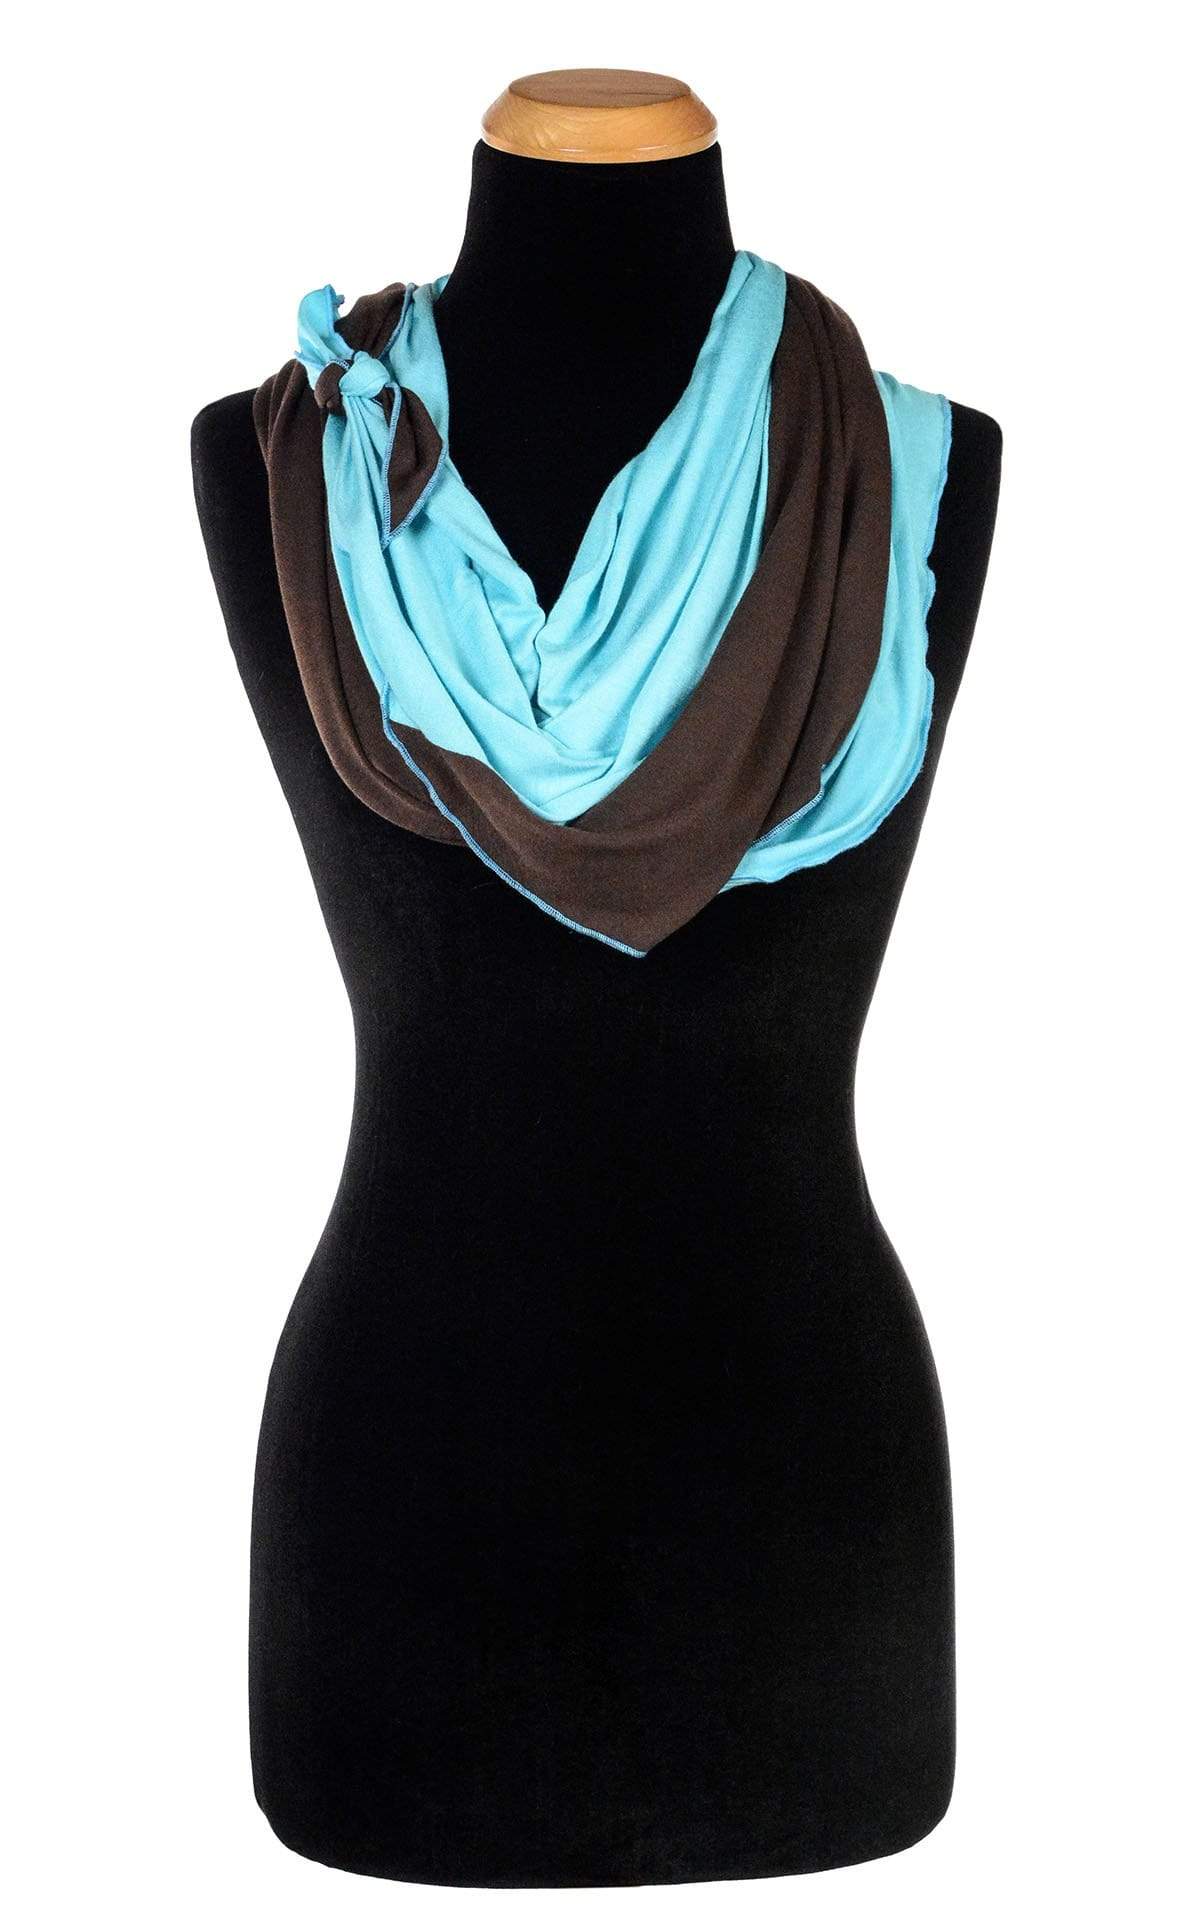 Ladies Large Handkerchief Scarf, Wrap jersey knit fabric on a mannequin wrapped twice tied on side | Terra W/ Ocean of Emptiness, Chocolate brown and Light Blue| Handmade in Seattle WA | Pandemonium Millinery